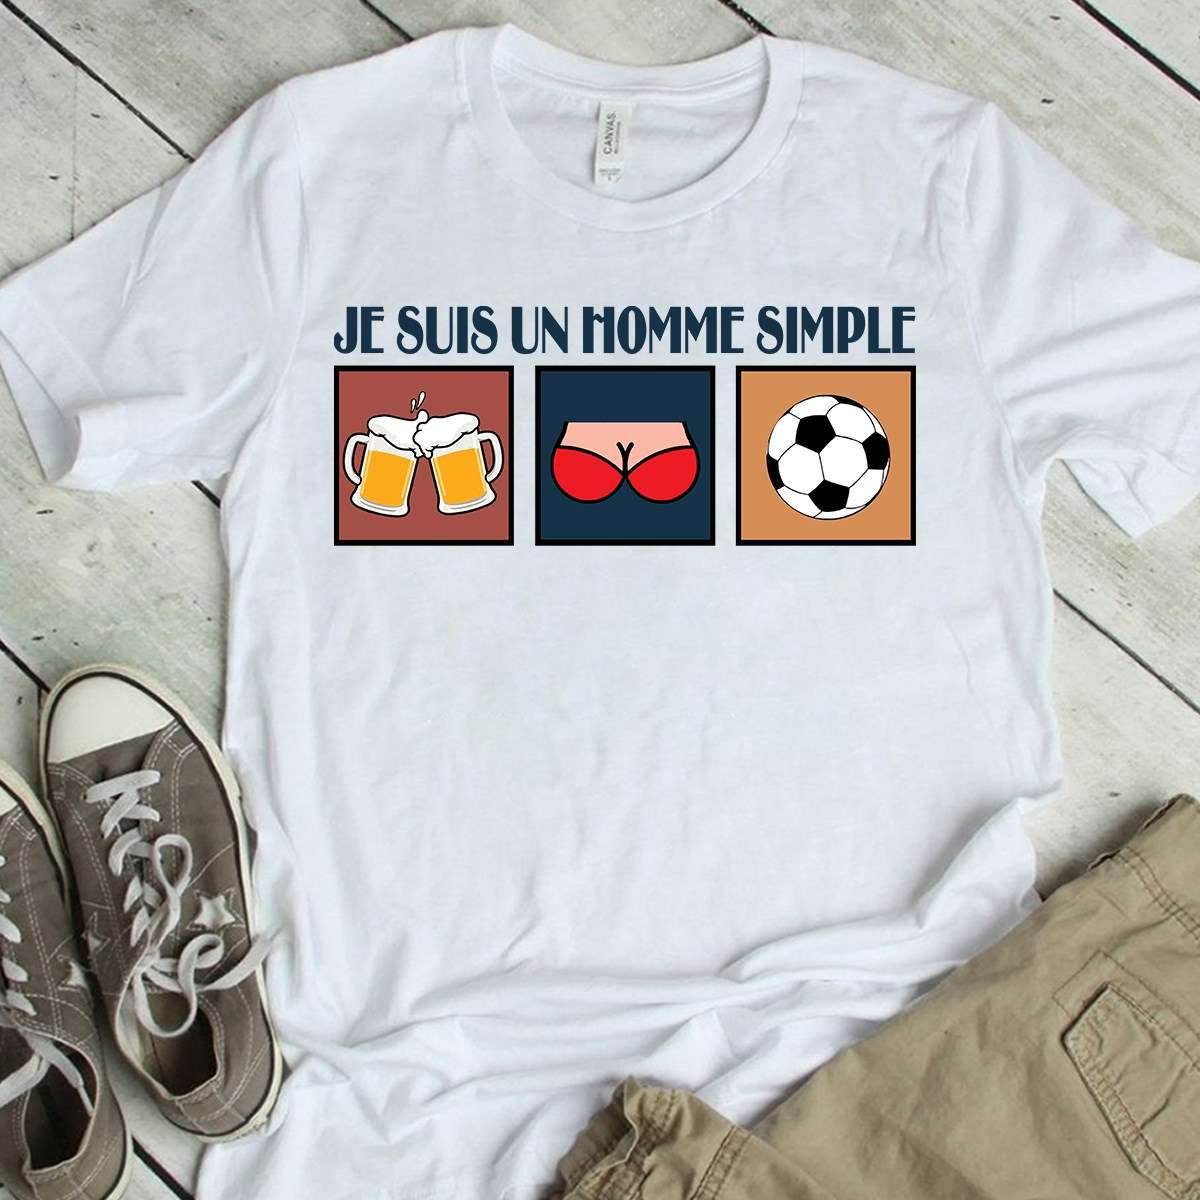 Je suis un homme simple - Football and beer, love boobs